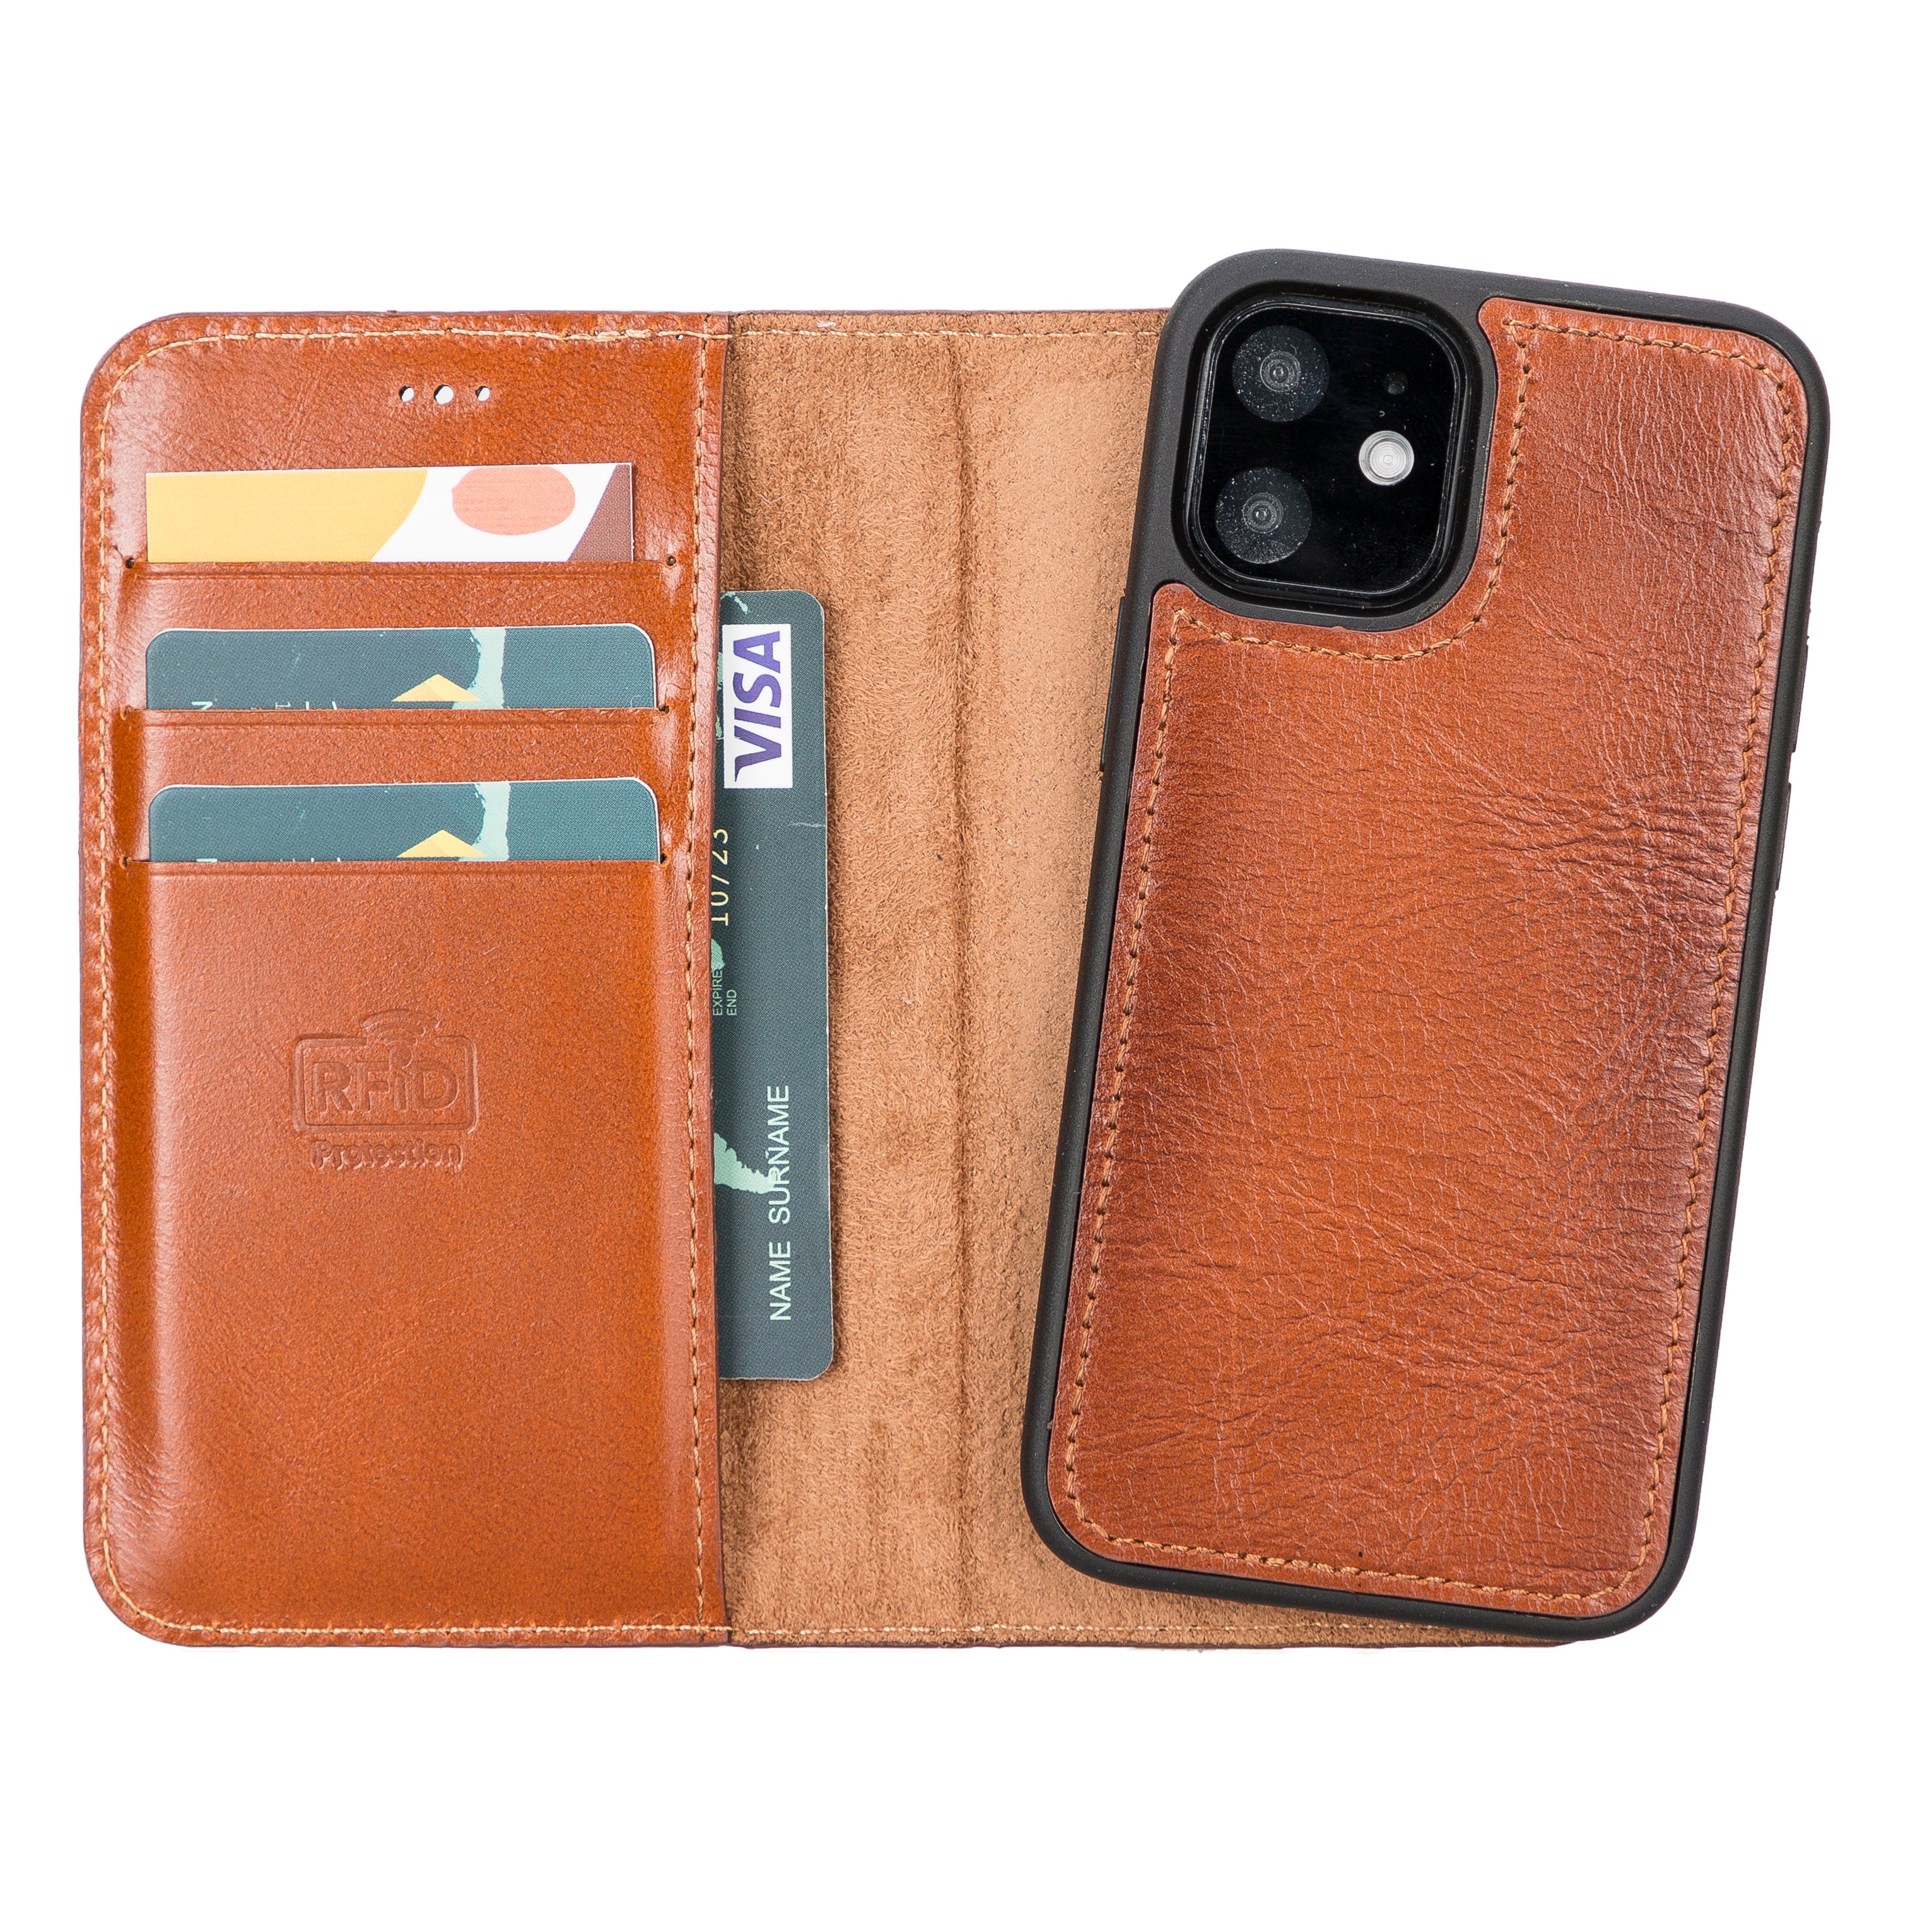 DelfiCase Leather Magnetic Detachable Wallet Case for iPhone 12 Mini (5.4") 23